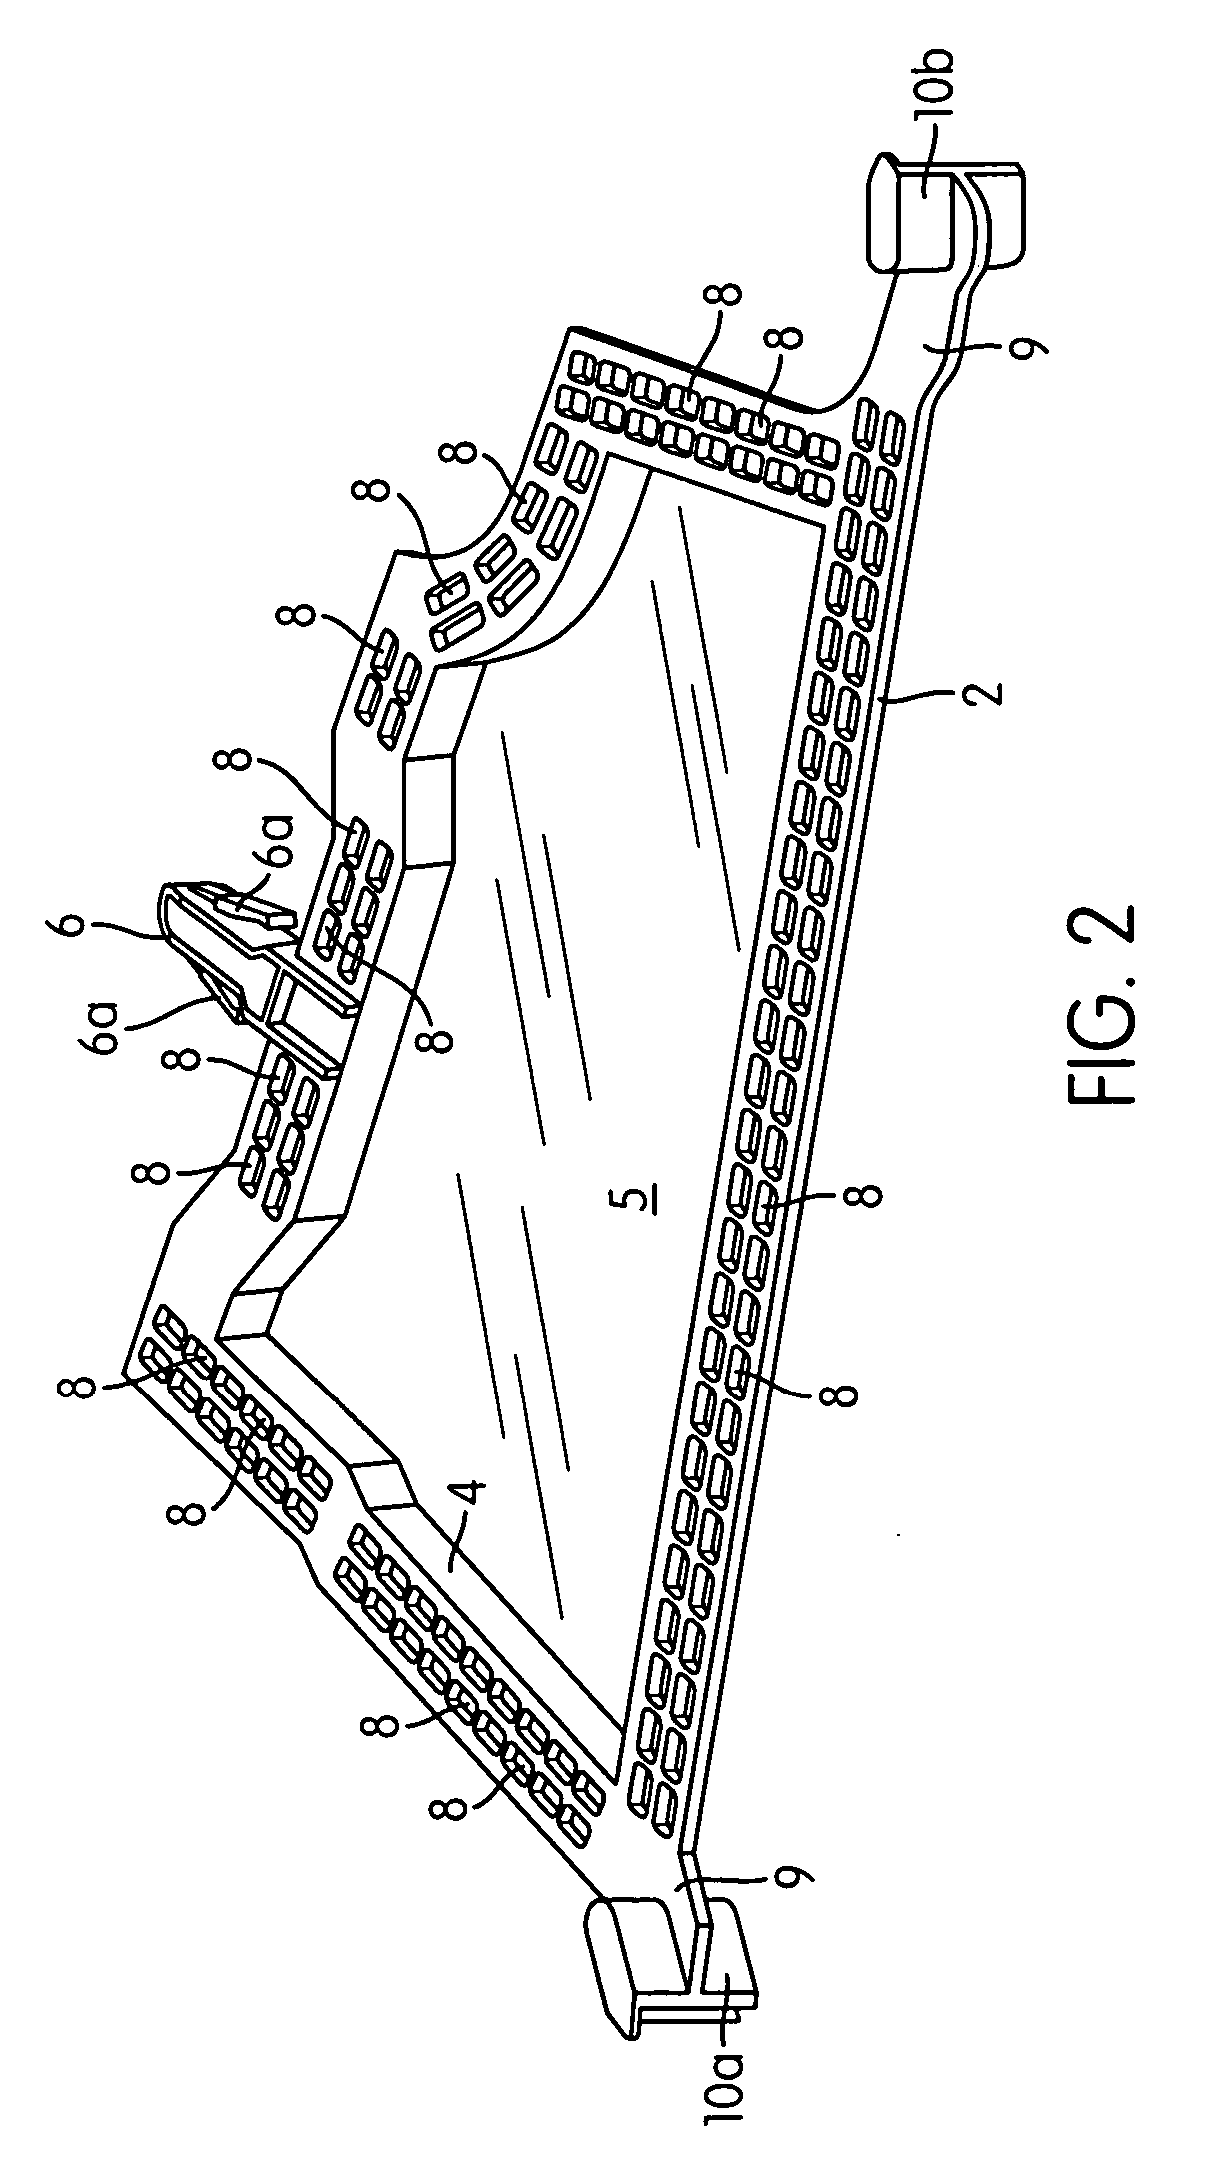 Holding jig for a foamable material